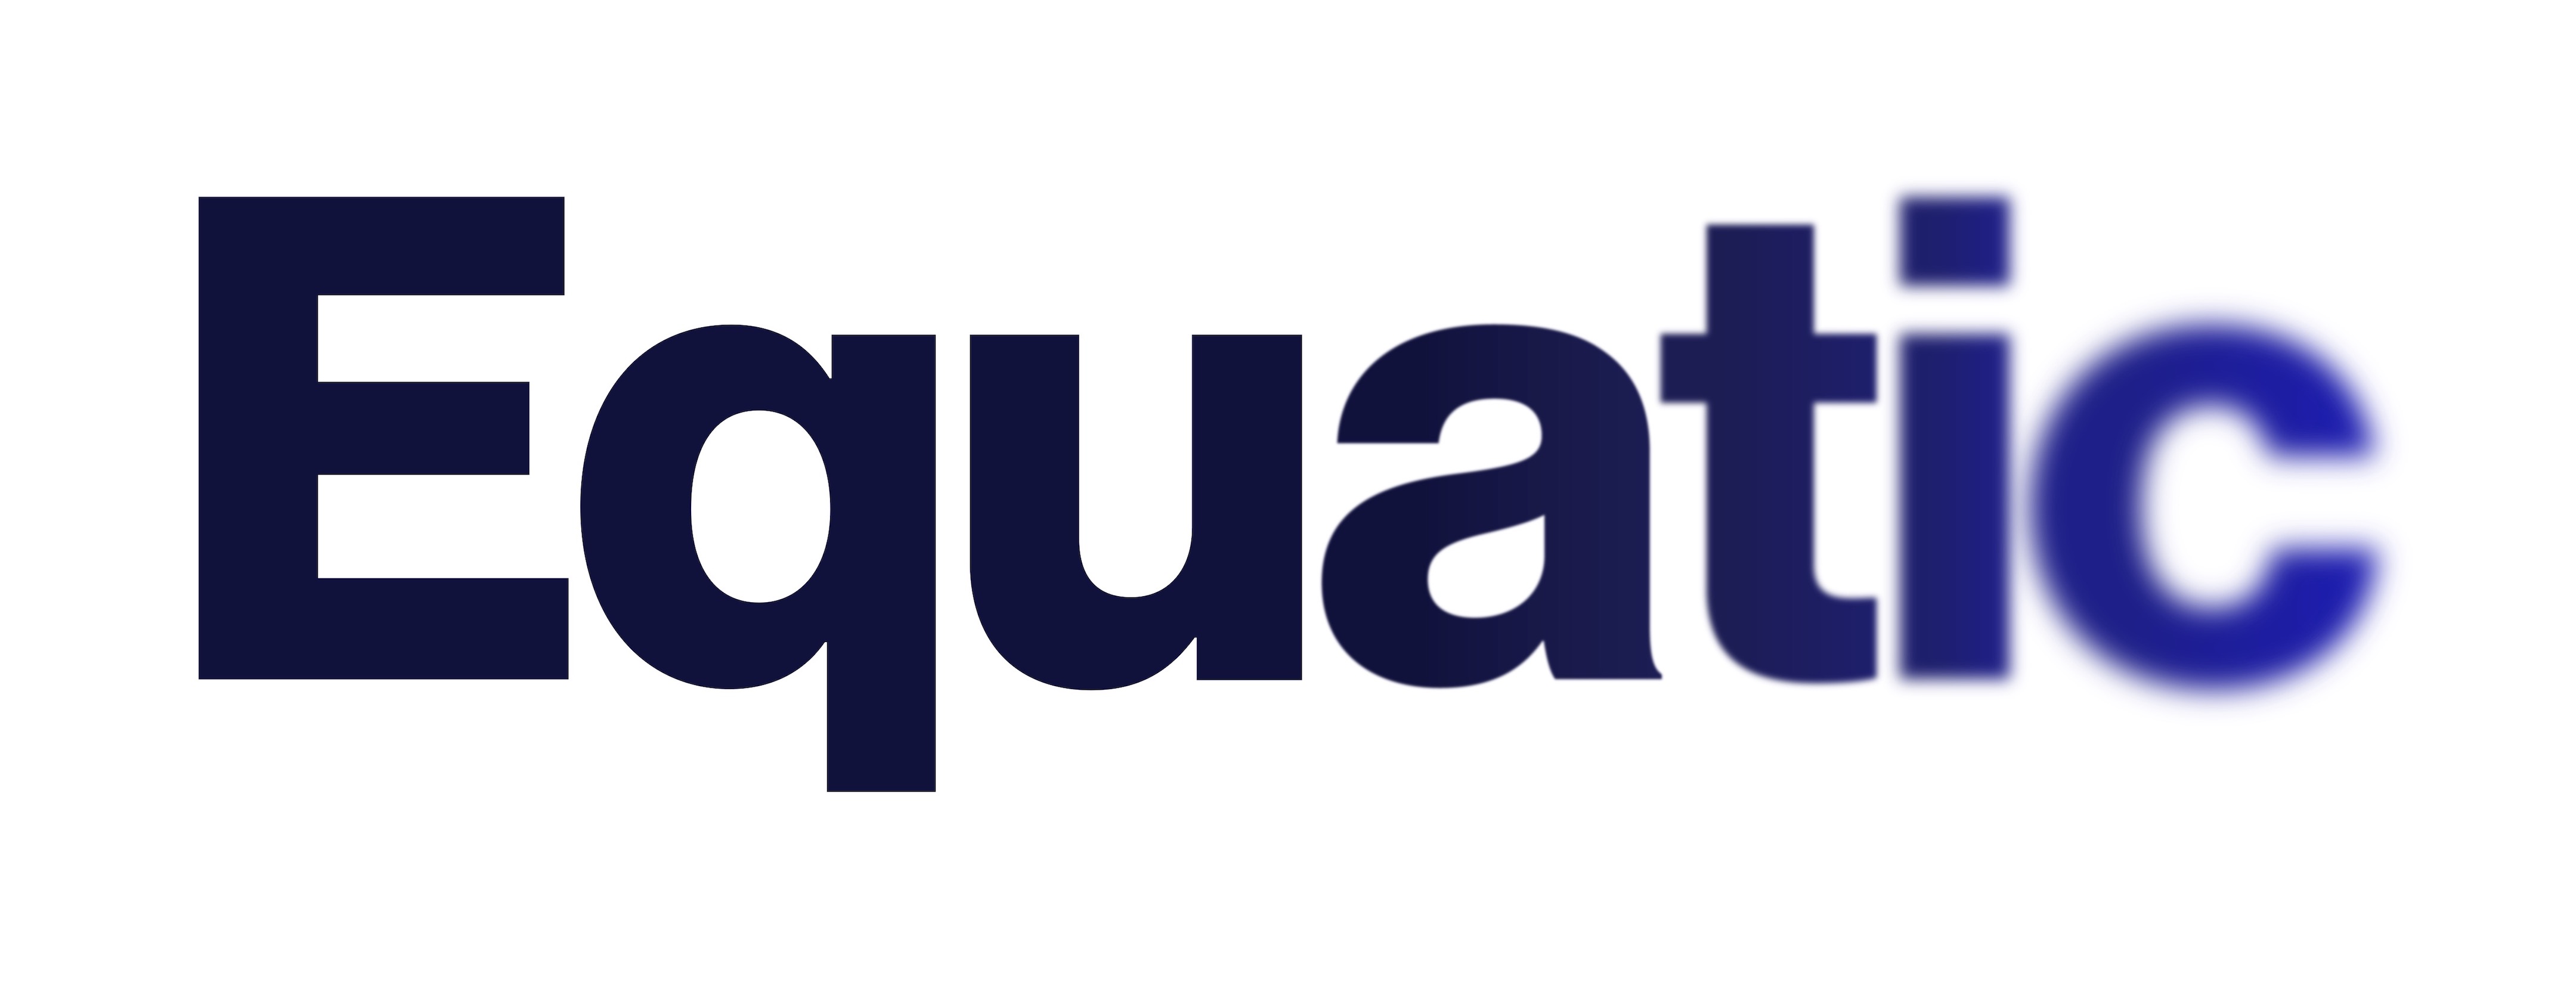 Equatic Publishes Standard-Setting Methodology for Carbon Removal Verification with EcoEngineers and the International Organization for Standardization